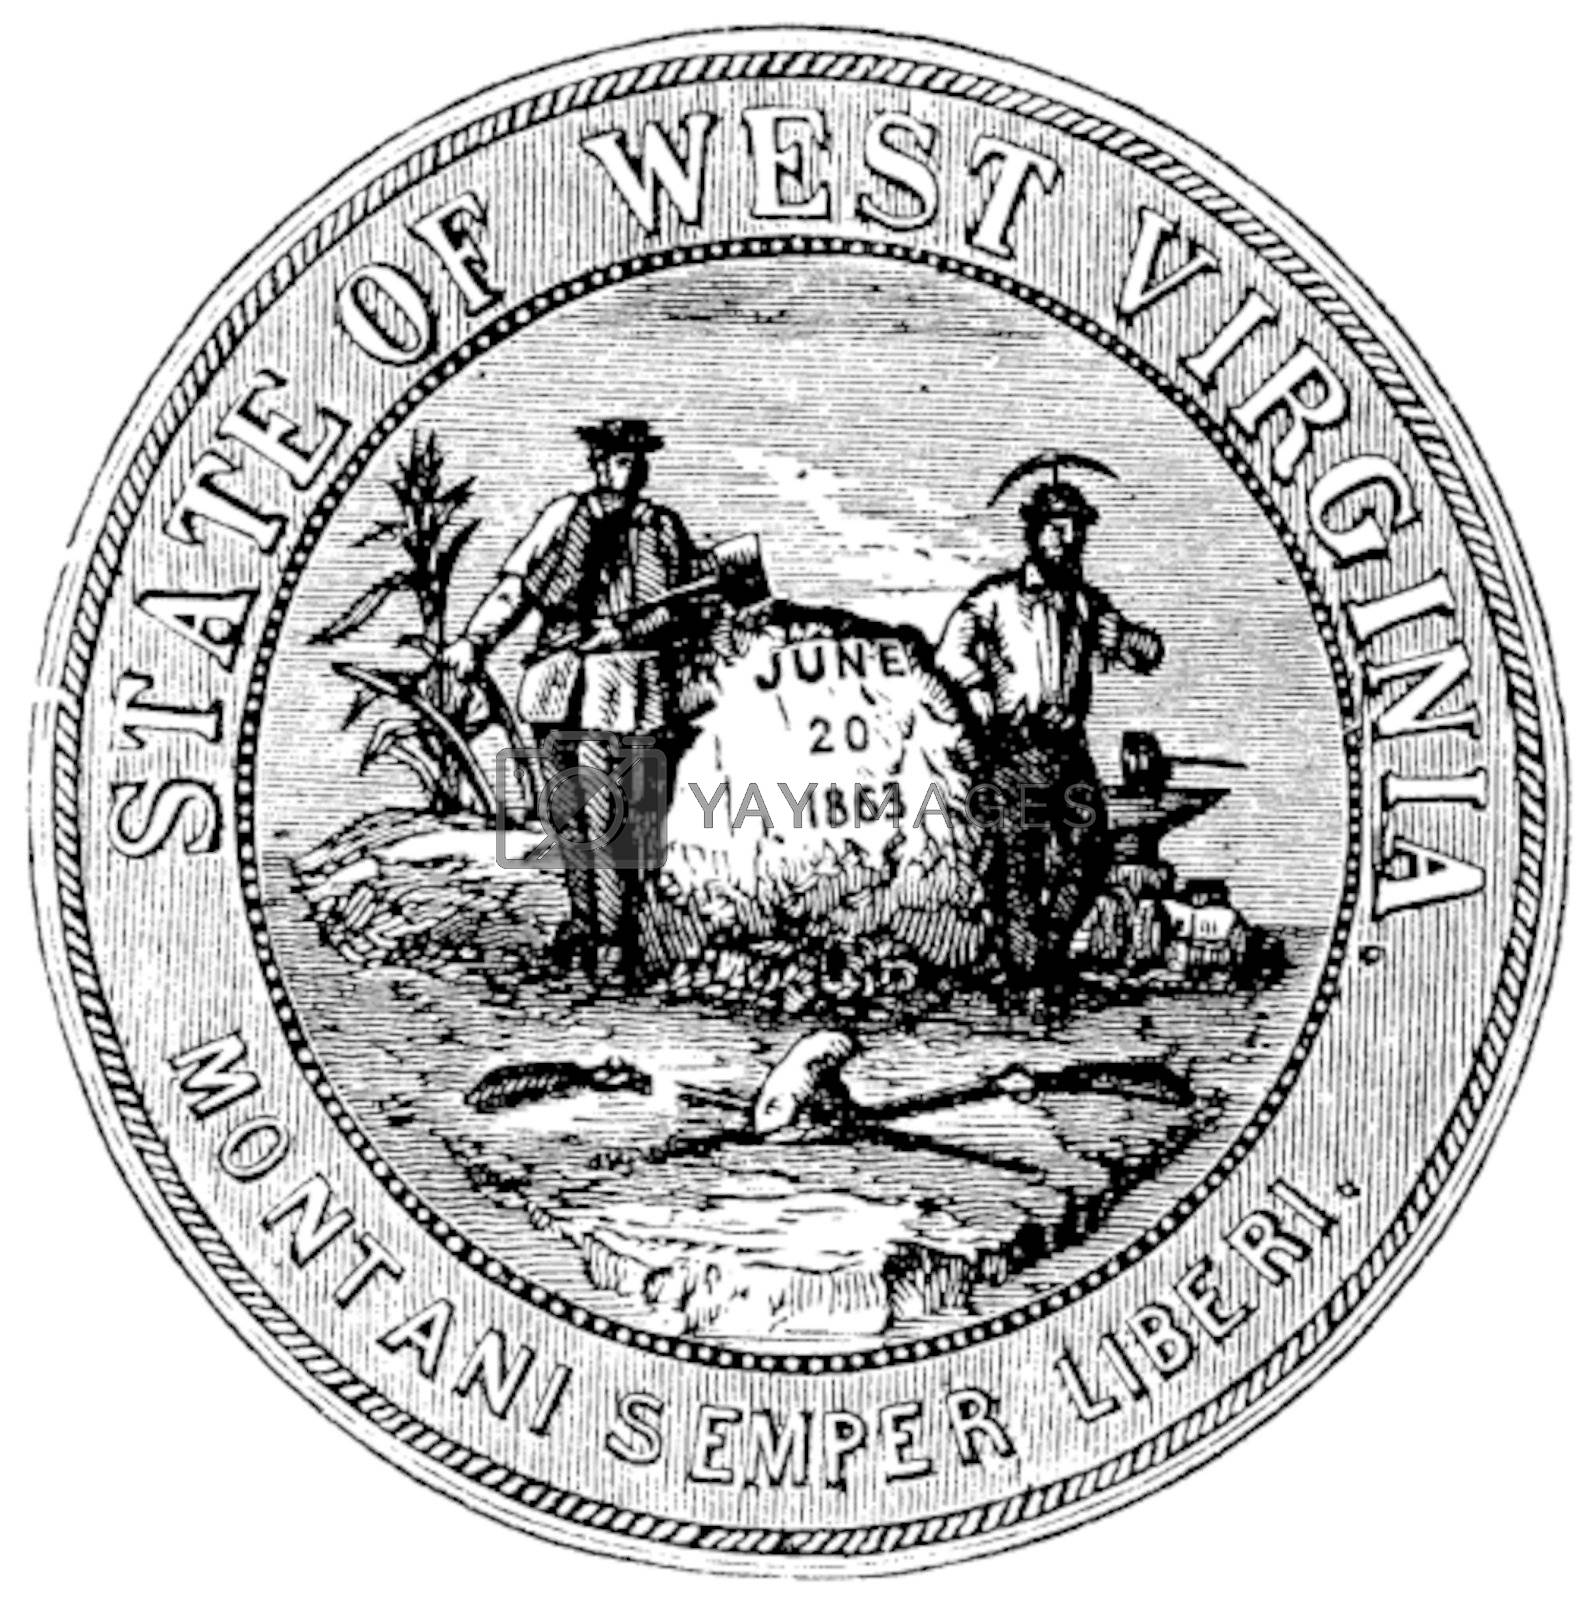 Royalty free image of Seal of the State of West Virginia, USA, vintage engraving by Morphart